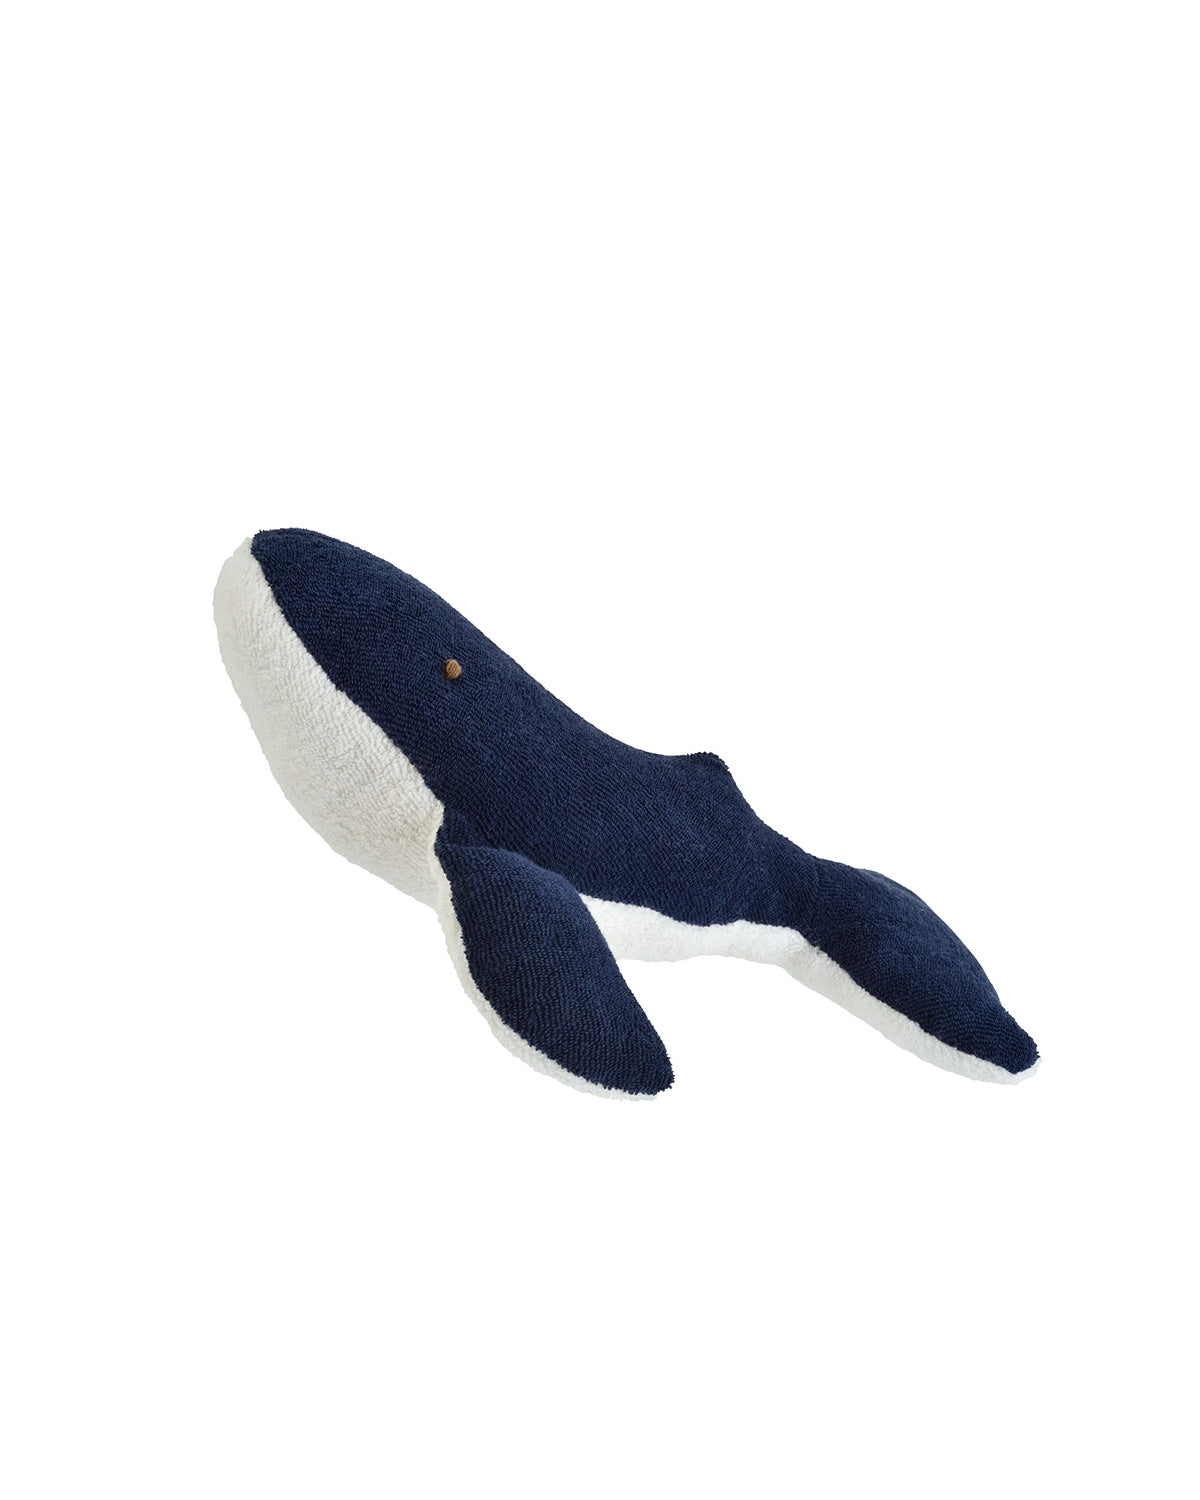 Humphrey the organic cotton Whale product image